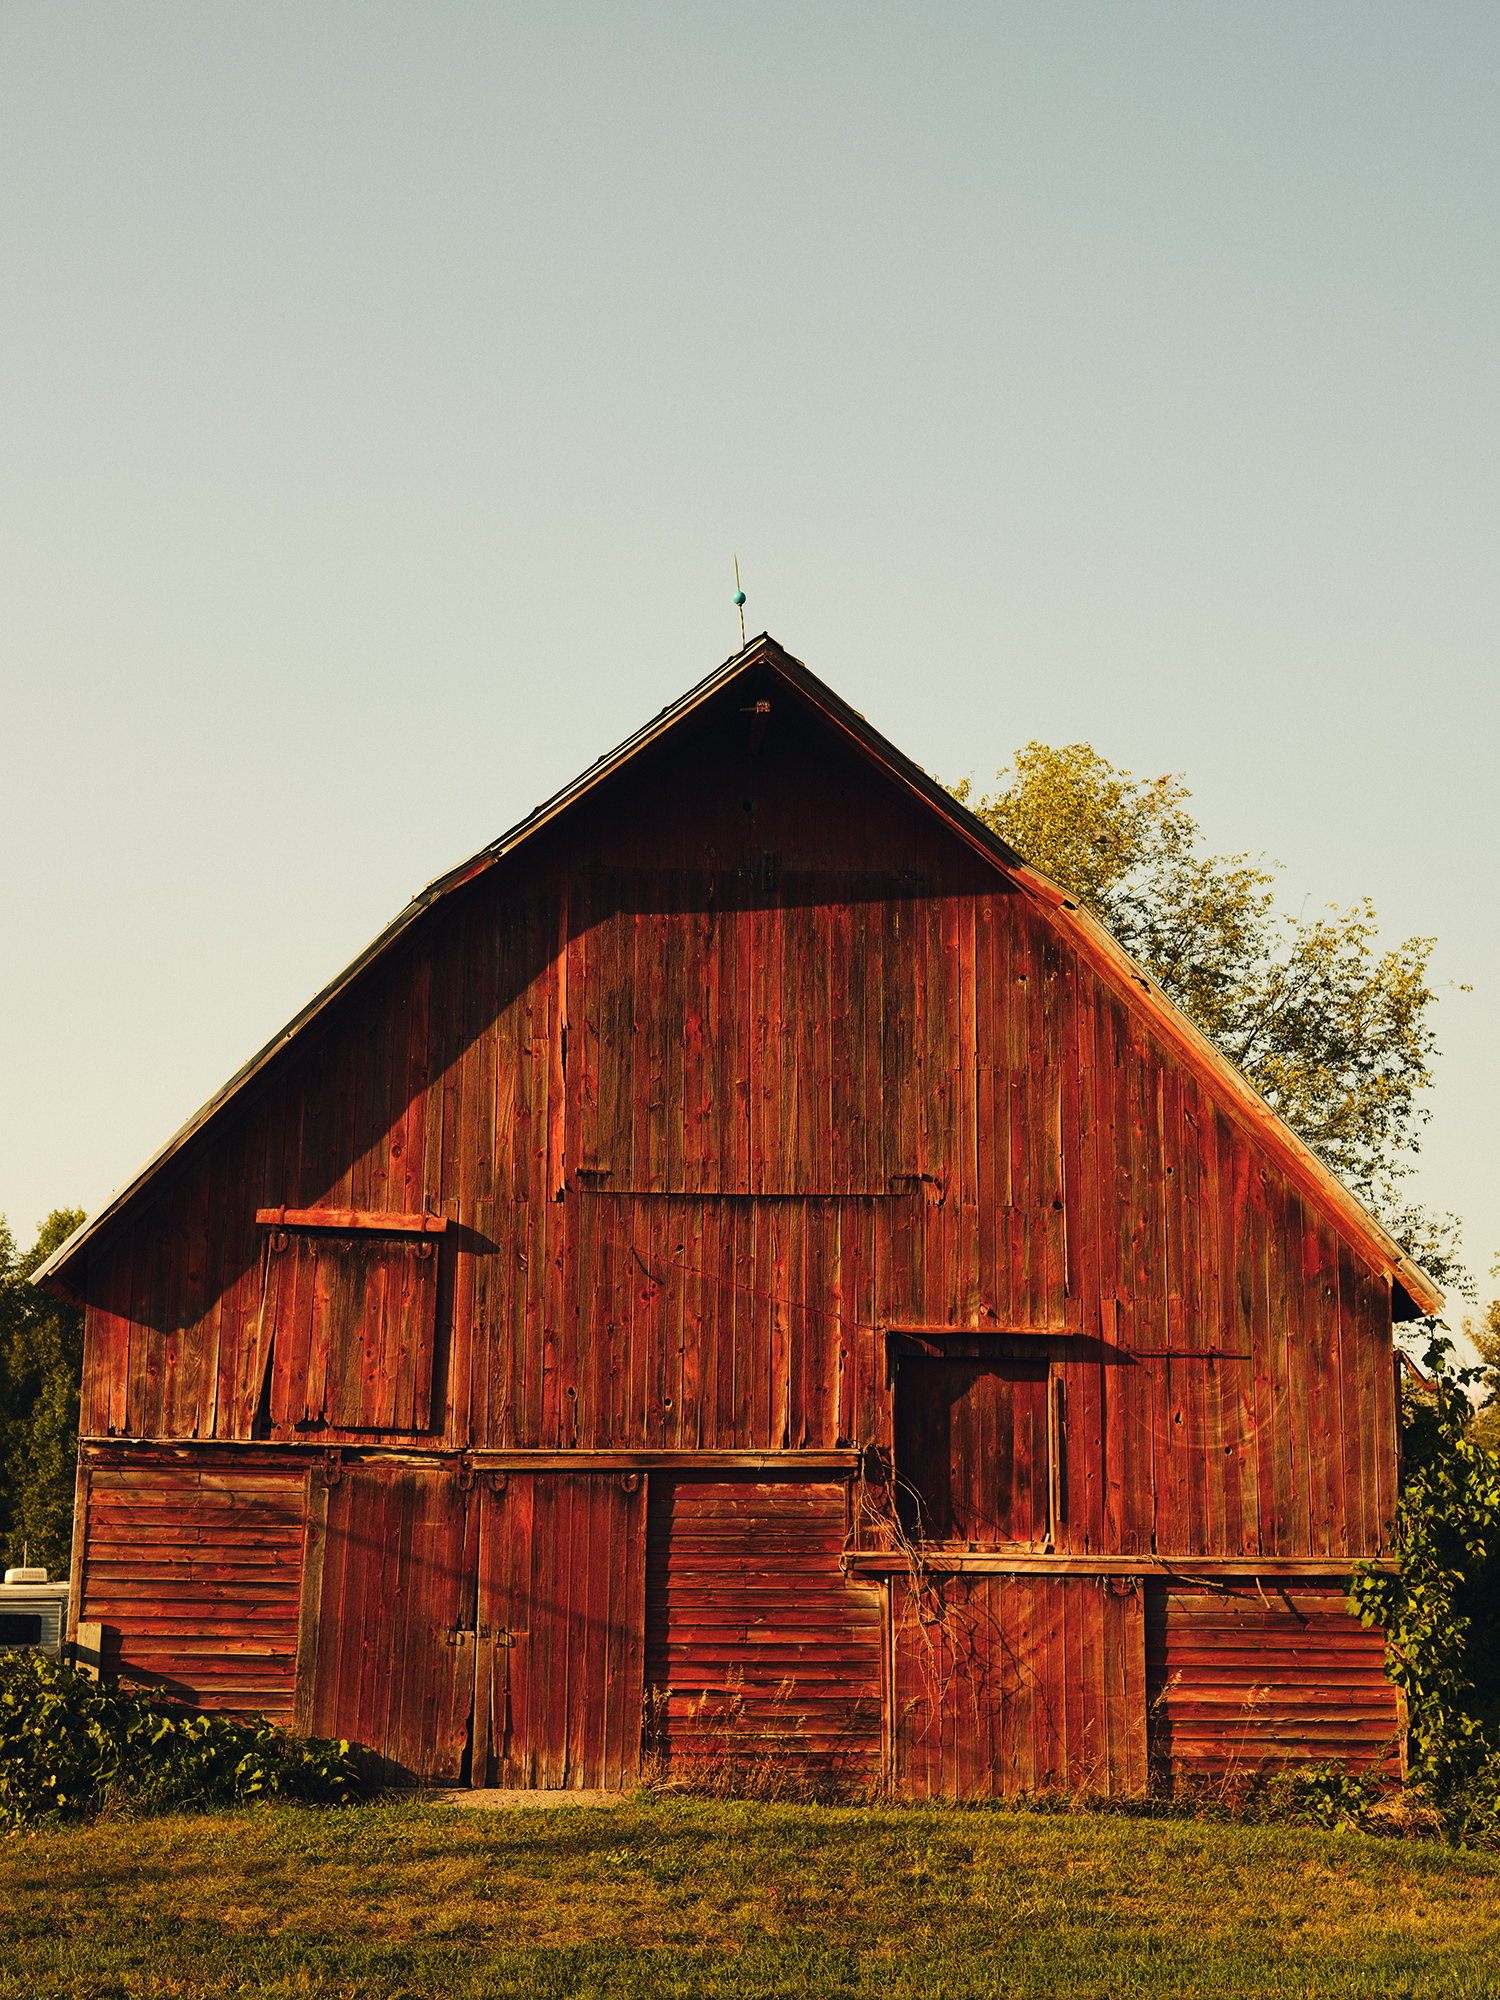 A rustic red barn with the sun shining on it